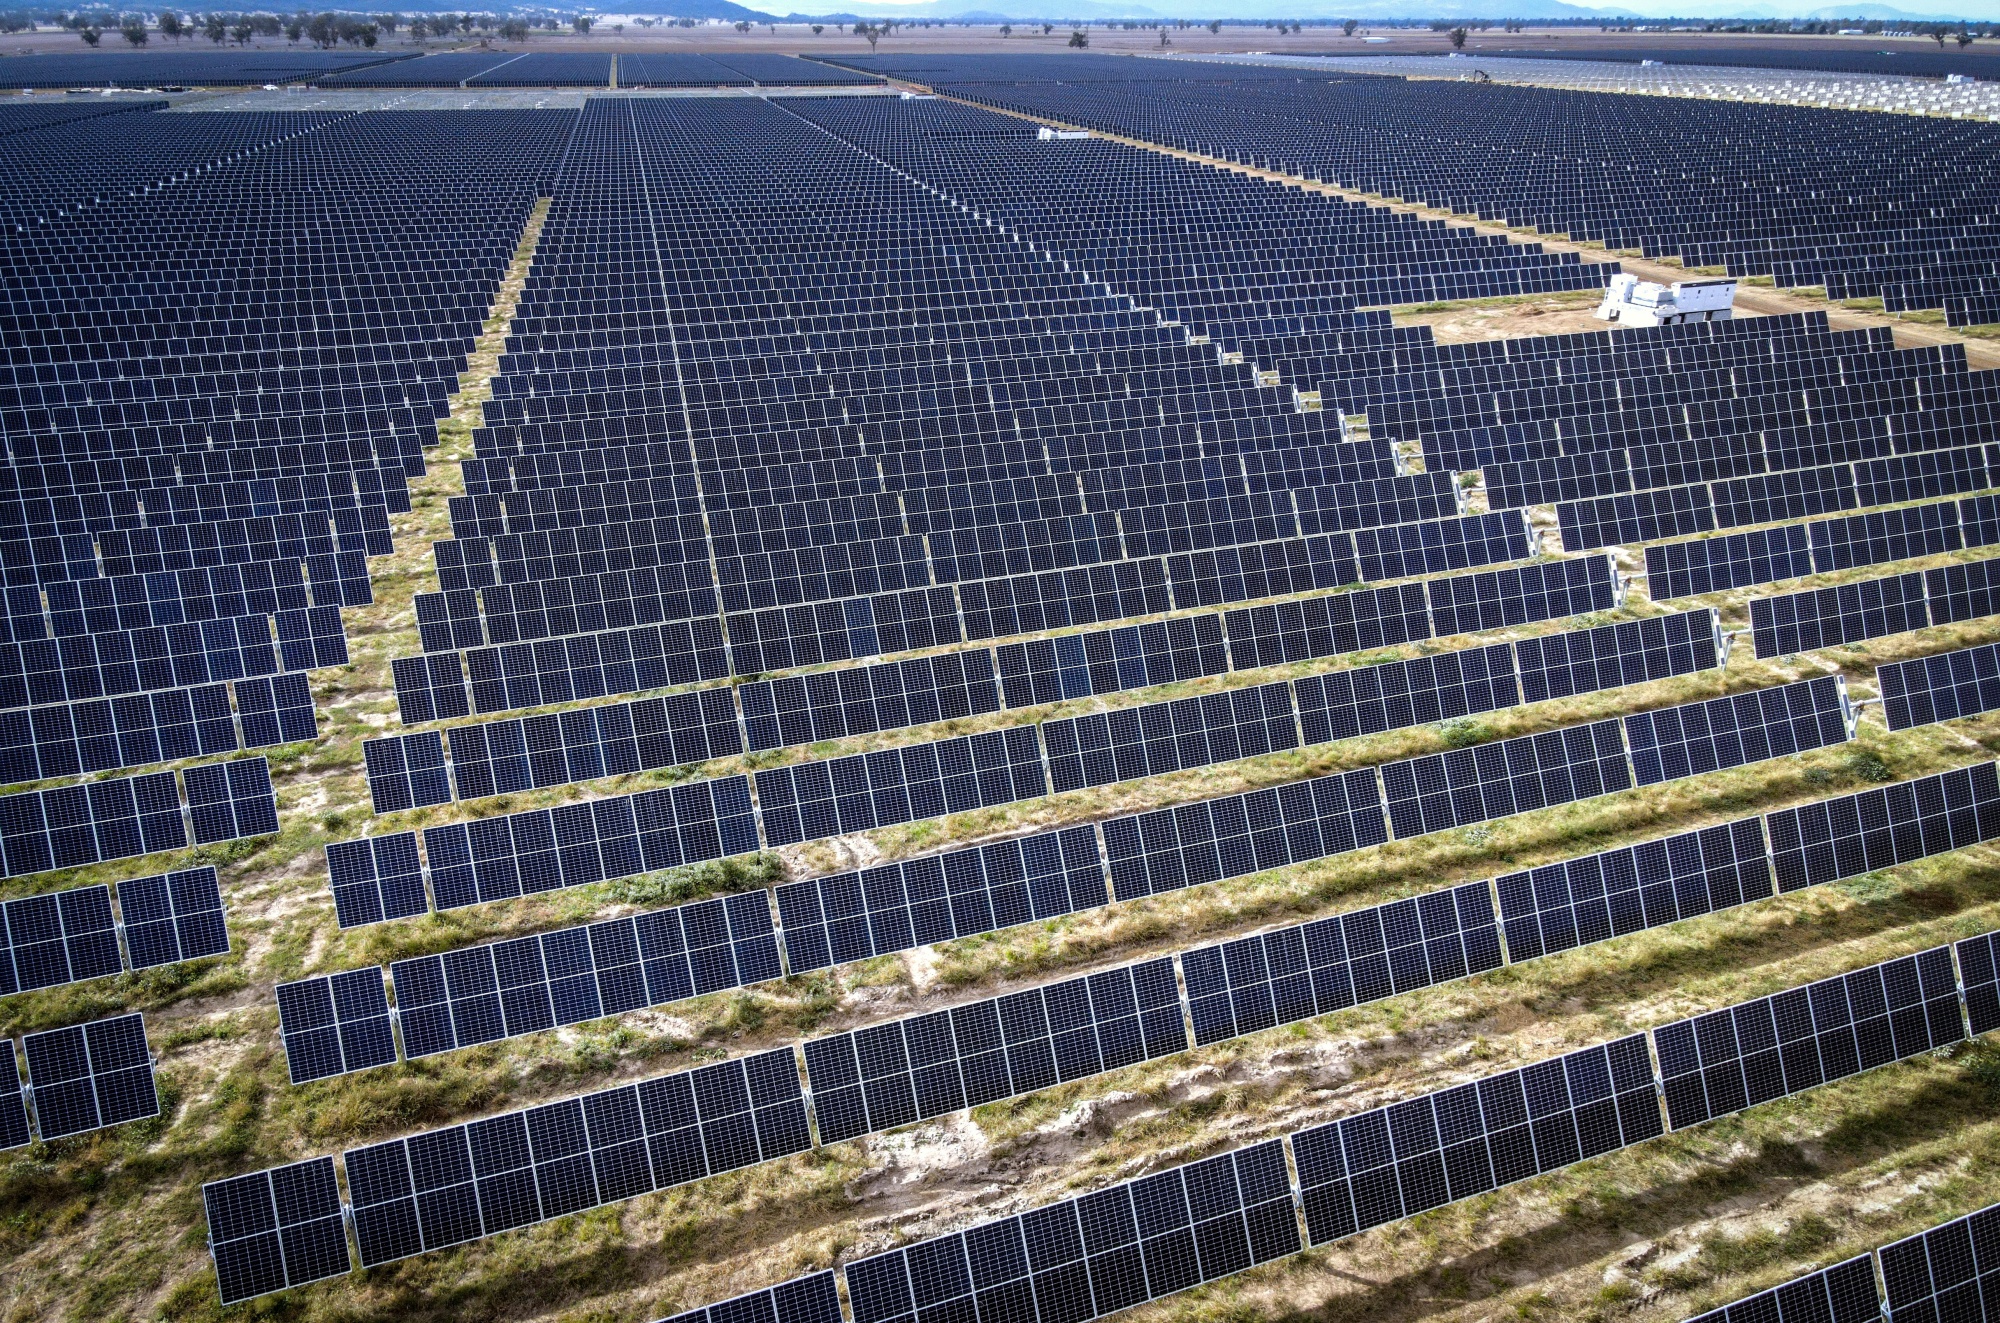 Photovoltaic modules at a solar farm in&nbsp;New South Wales.